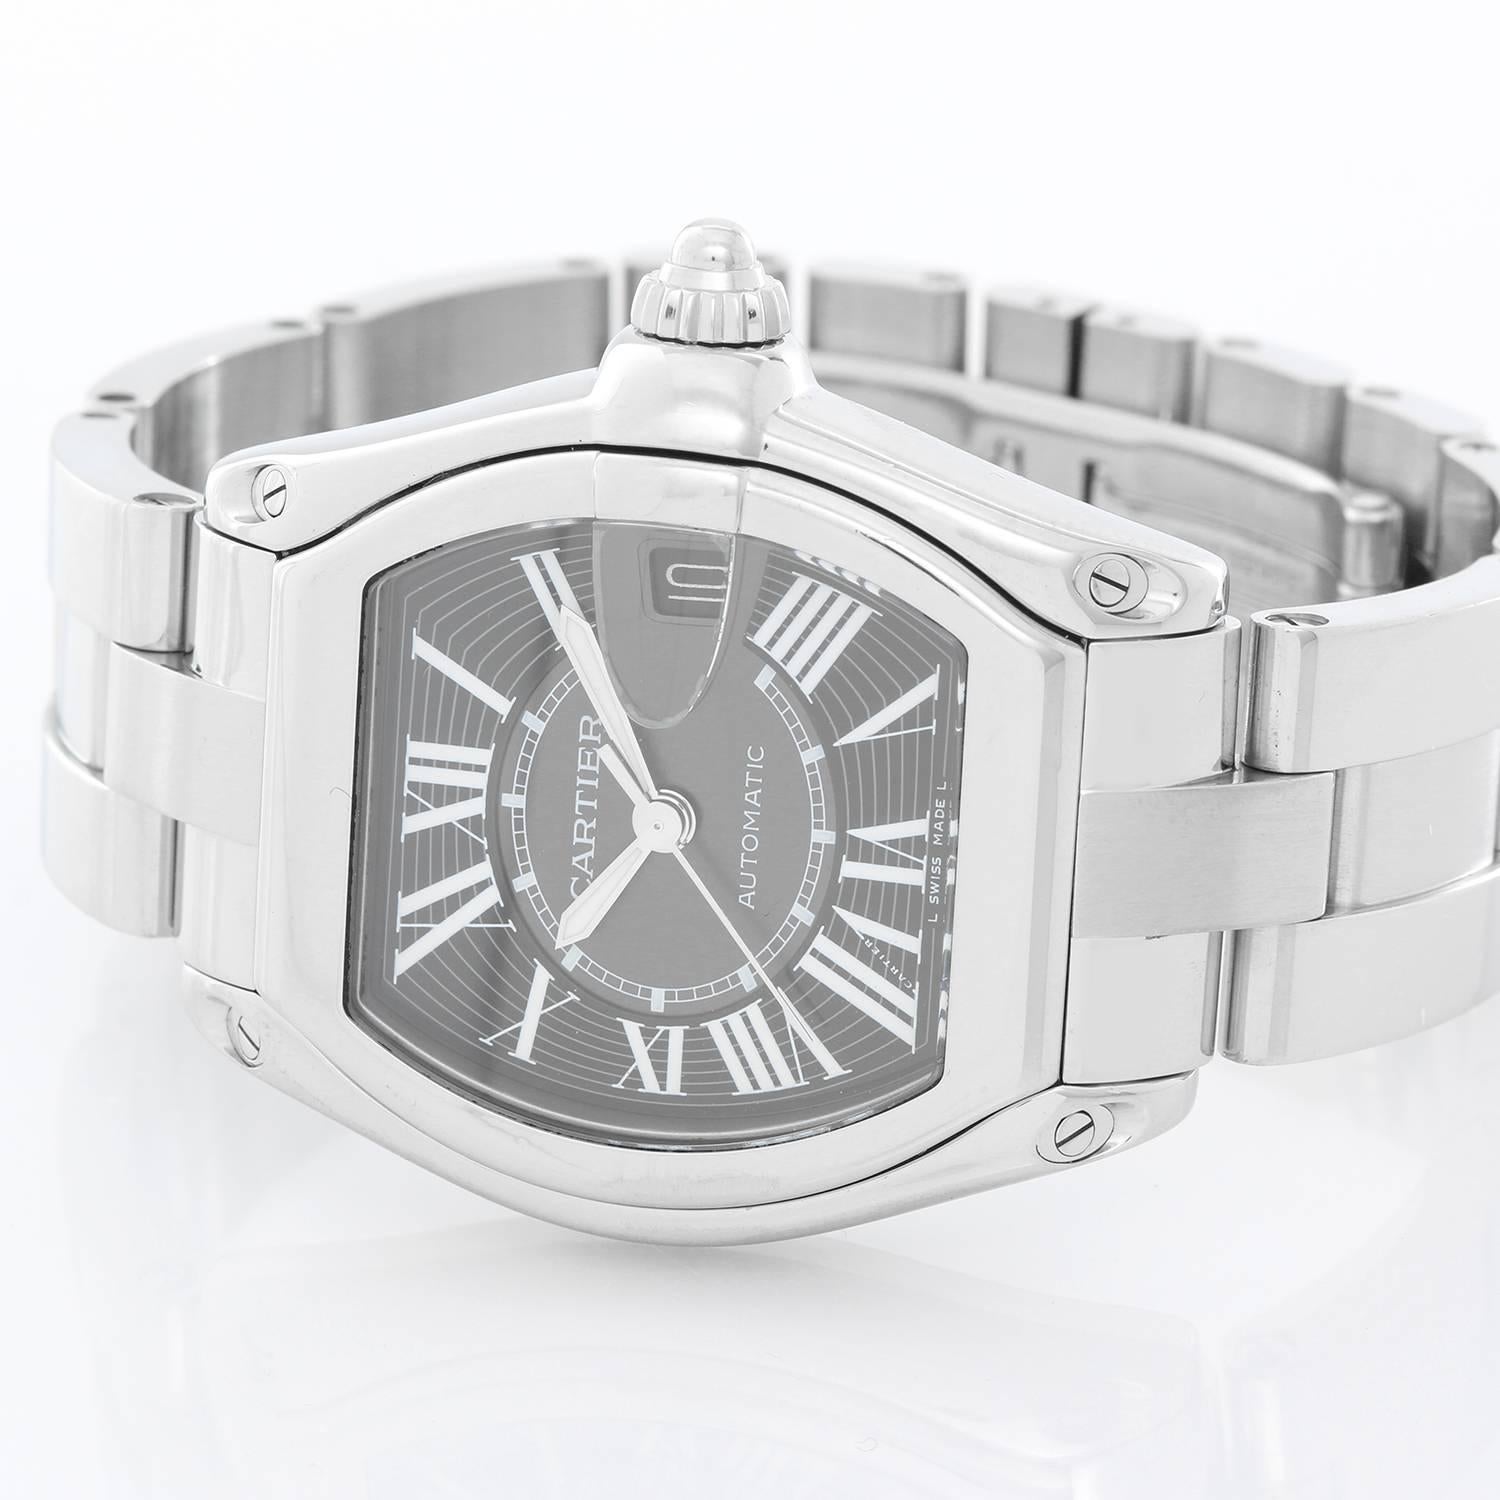 Cartier Roadster Men's Stainless Steel Automatic Watch  W62041V3 -  Automatic winding. Stainless steel case  (38mm x 44mm). Black dial with Arabic numerals; date at 3 o'clock. Stainless steel Cartier Roadster bracelet with deployant clasp. Pre-owned